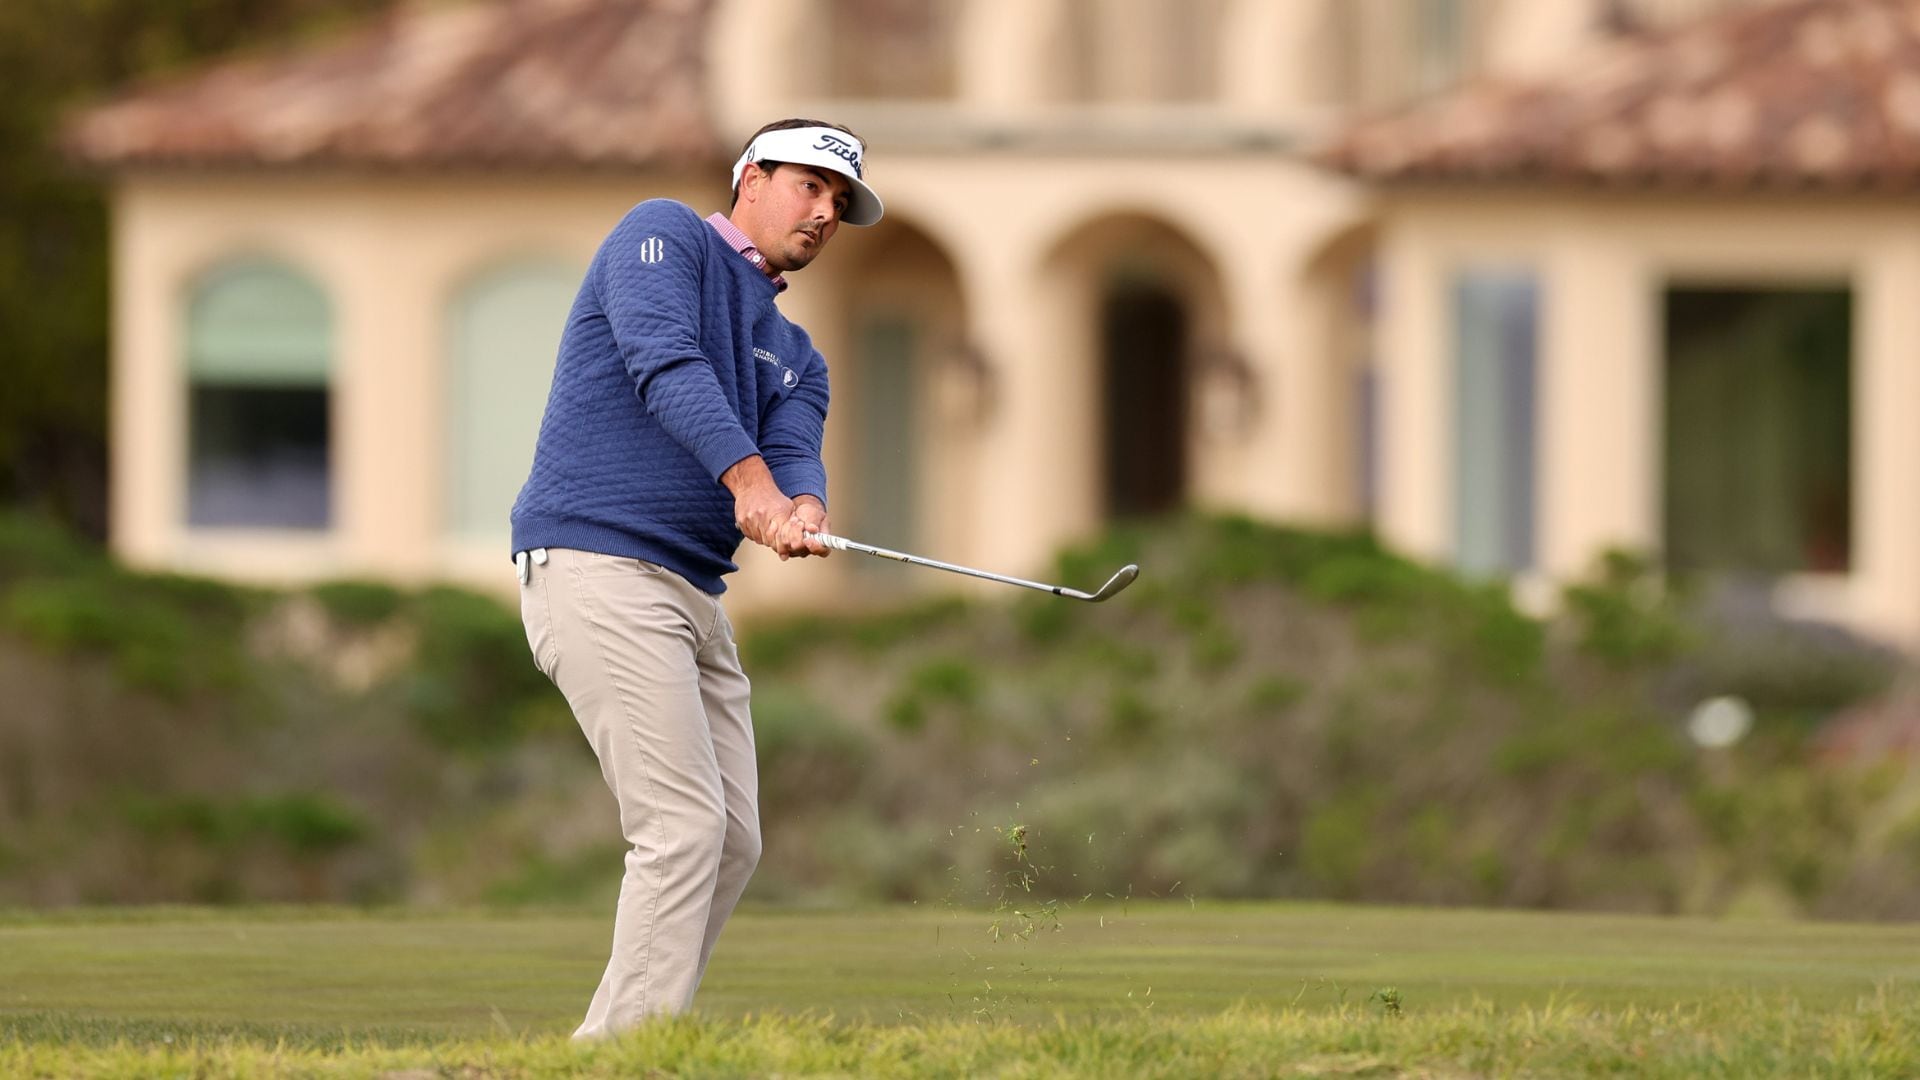 Hank Lebioda leads crowded leaderboard at AT&T Pebble Beach Pro-Am after Day 1